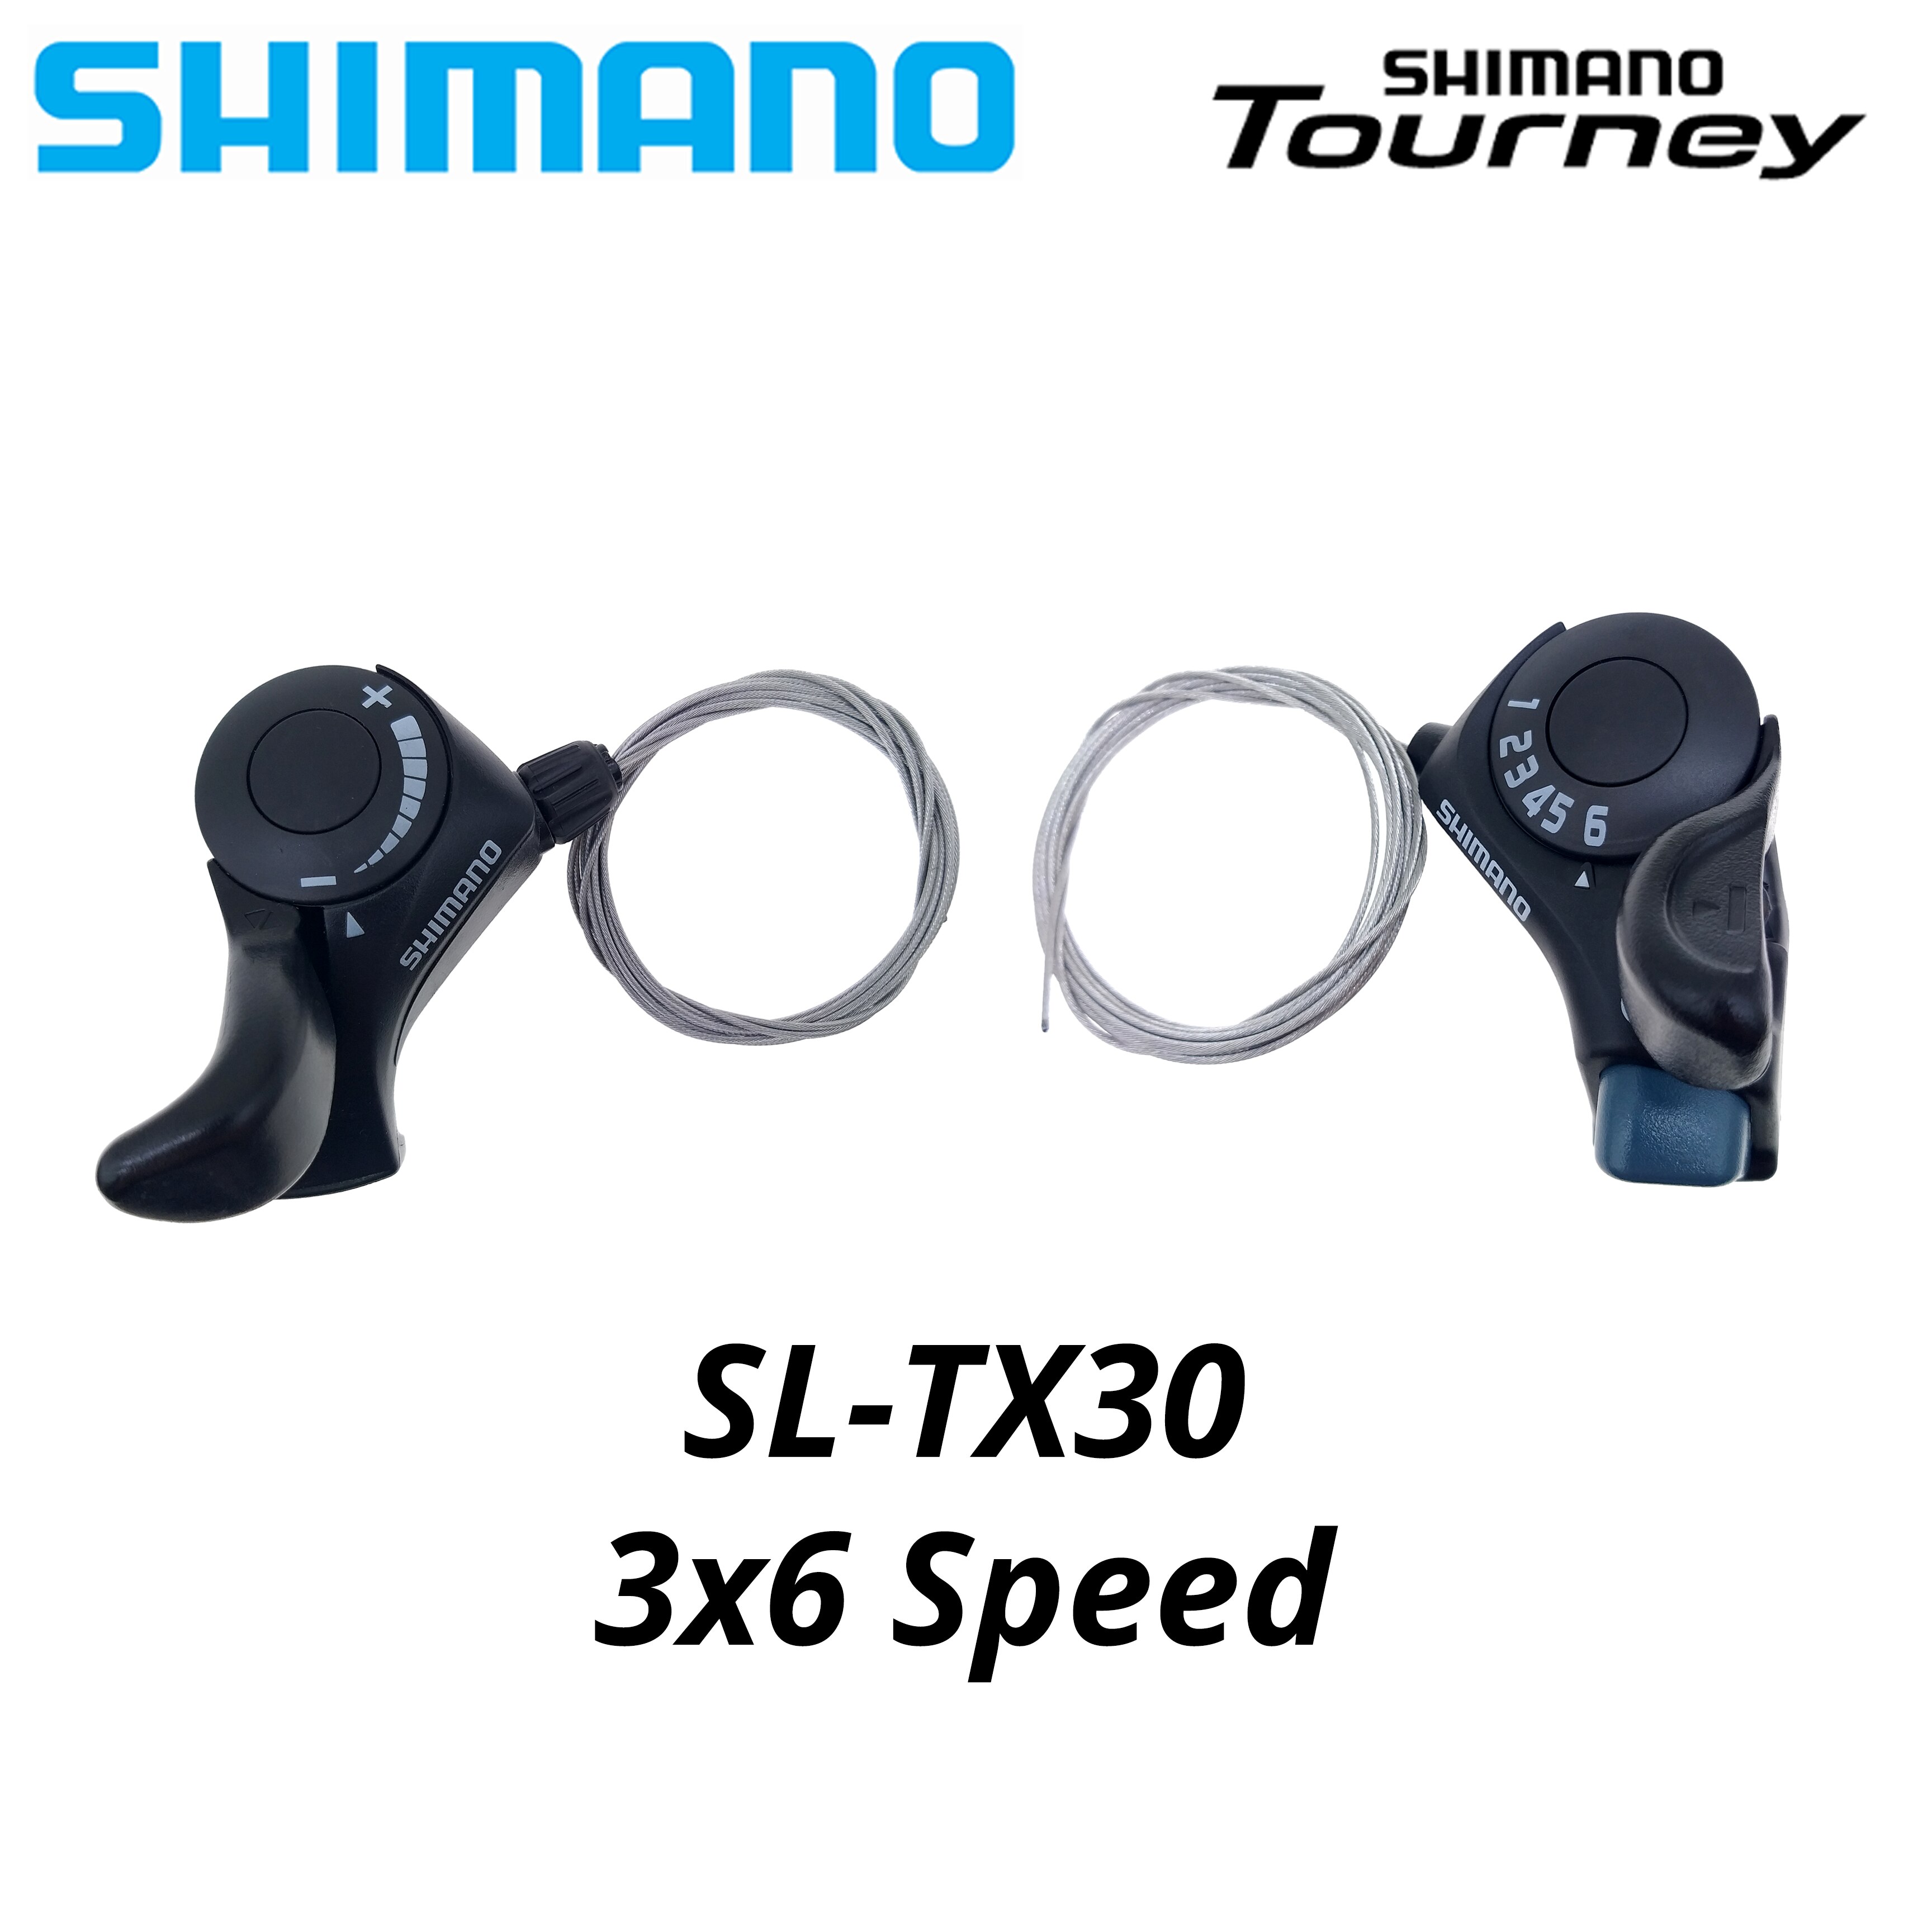 Shimano tourney sl  tx30 cykel gearstang 6 7s 18 21 speed  tx30 shifters indre gearkabel medfølger: Tx30 3 x 6 hastighed